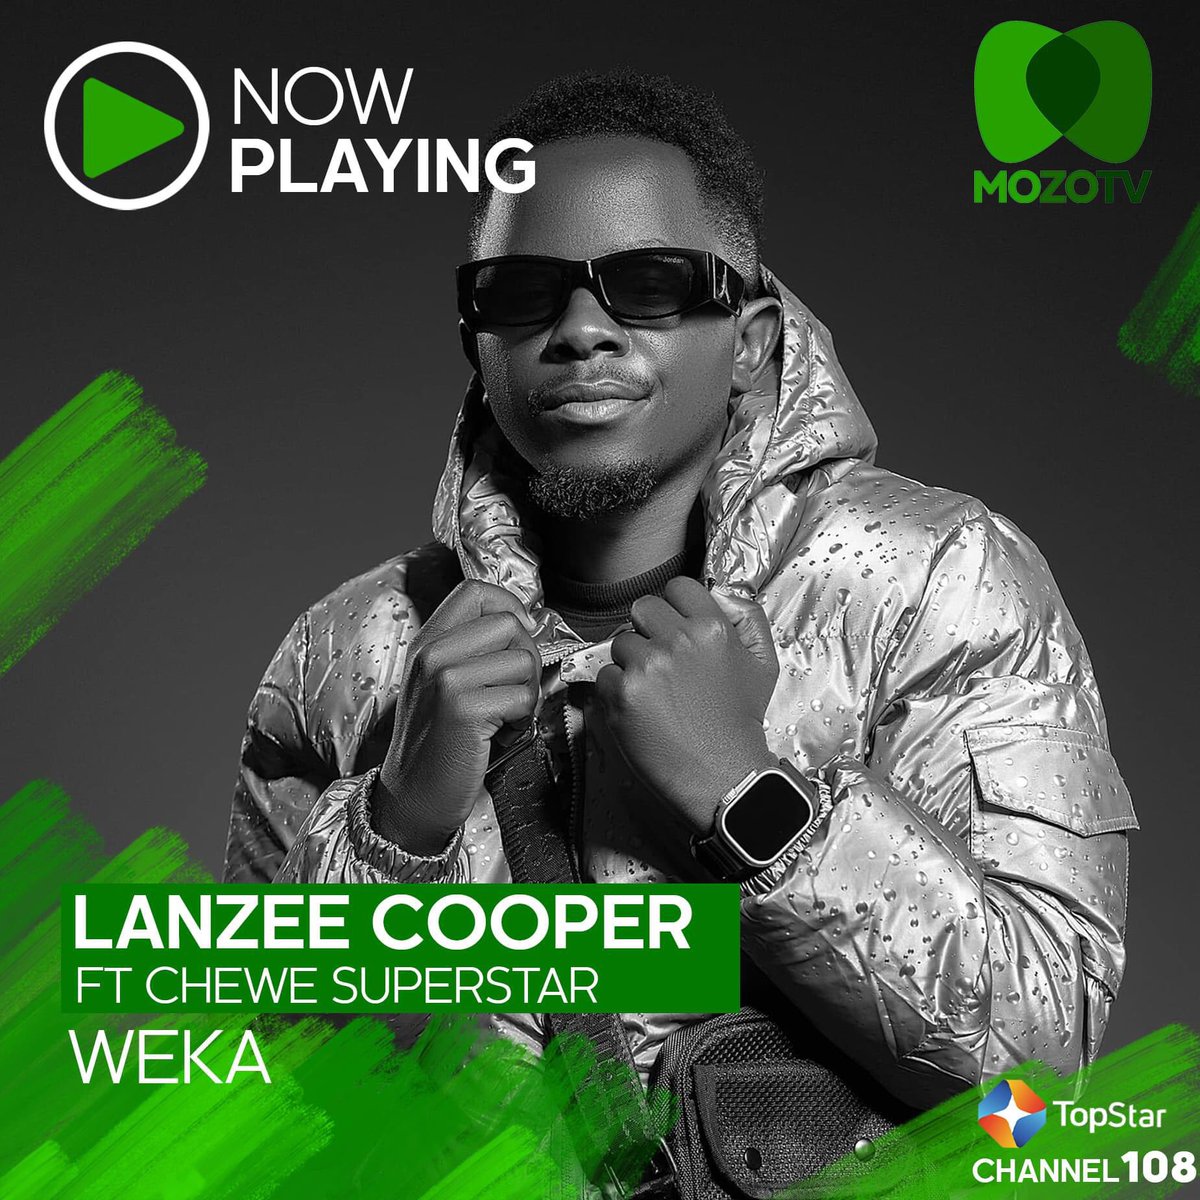 Music is the greatest form of excitement!💃🏽 Lanzee Cooper- Weka #NowPlaying Tune In Now! TopStar Channel 108 and 544 on DTH (Dish)💚 Also, install the Startimes APP via the link below 👇🏾: play.google.com/store/apps/det…... #ARefreshingExperience #NowPlaying